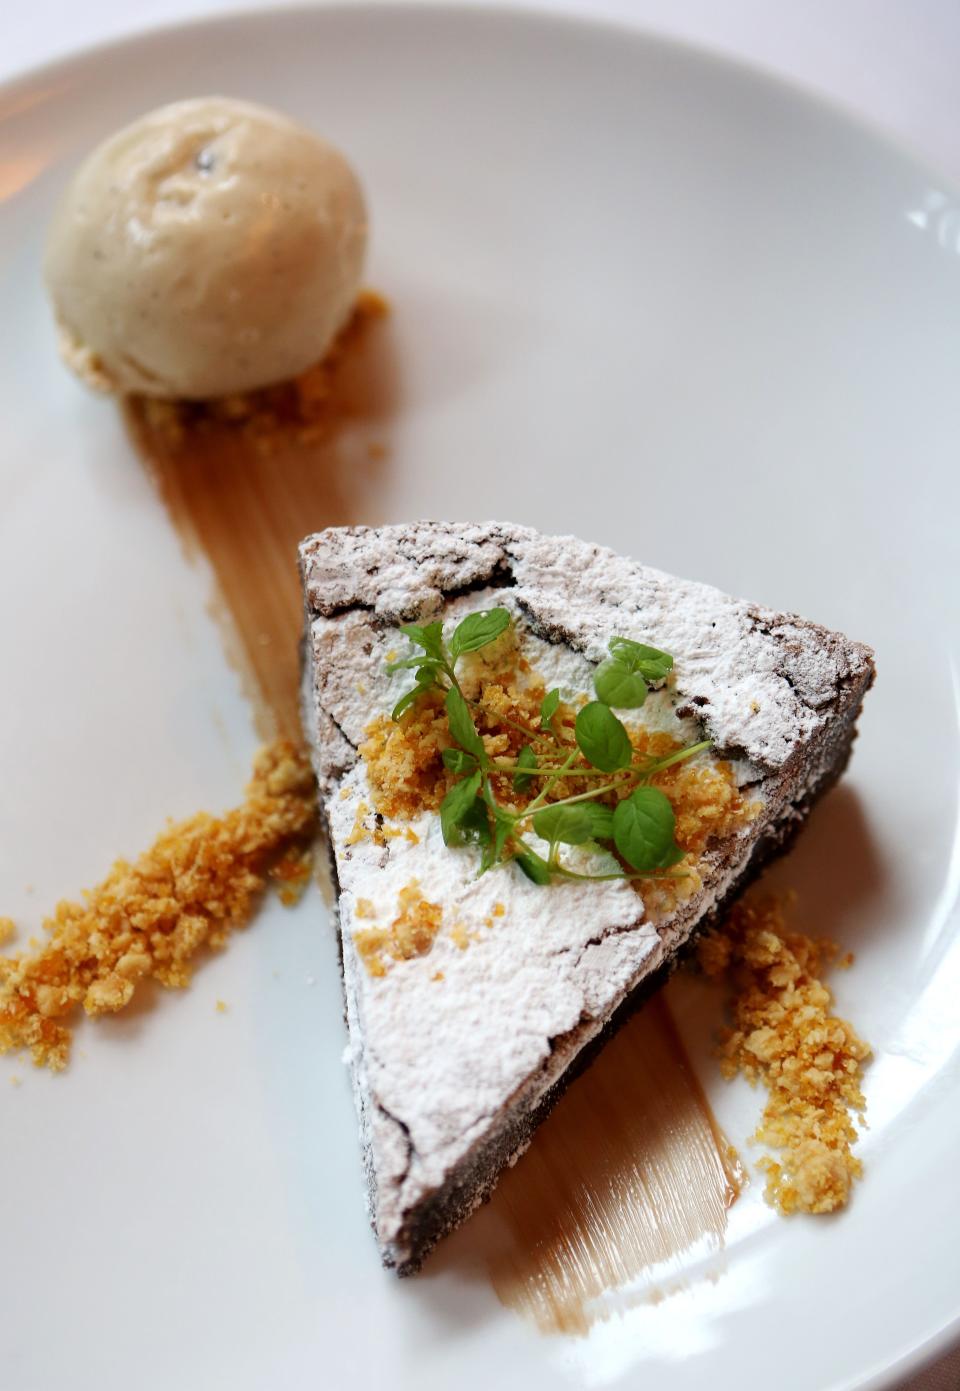 Warm chocolate butter pie with a vanilla bean espresso gelato by pastry chef Eric Clark of Jeff Ruby's Carlo & Johnny.